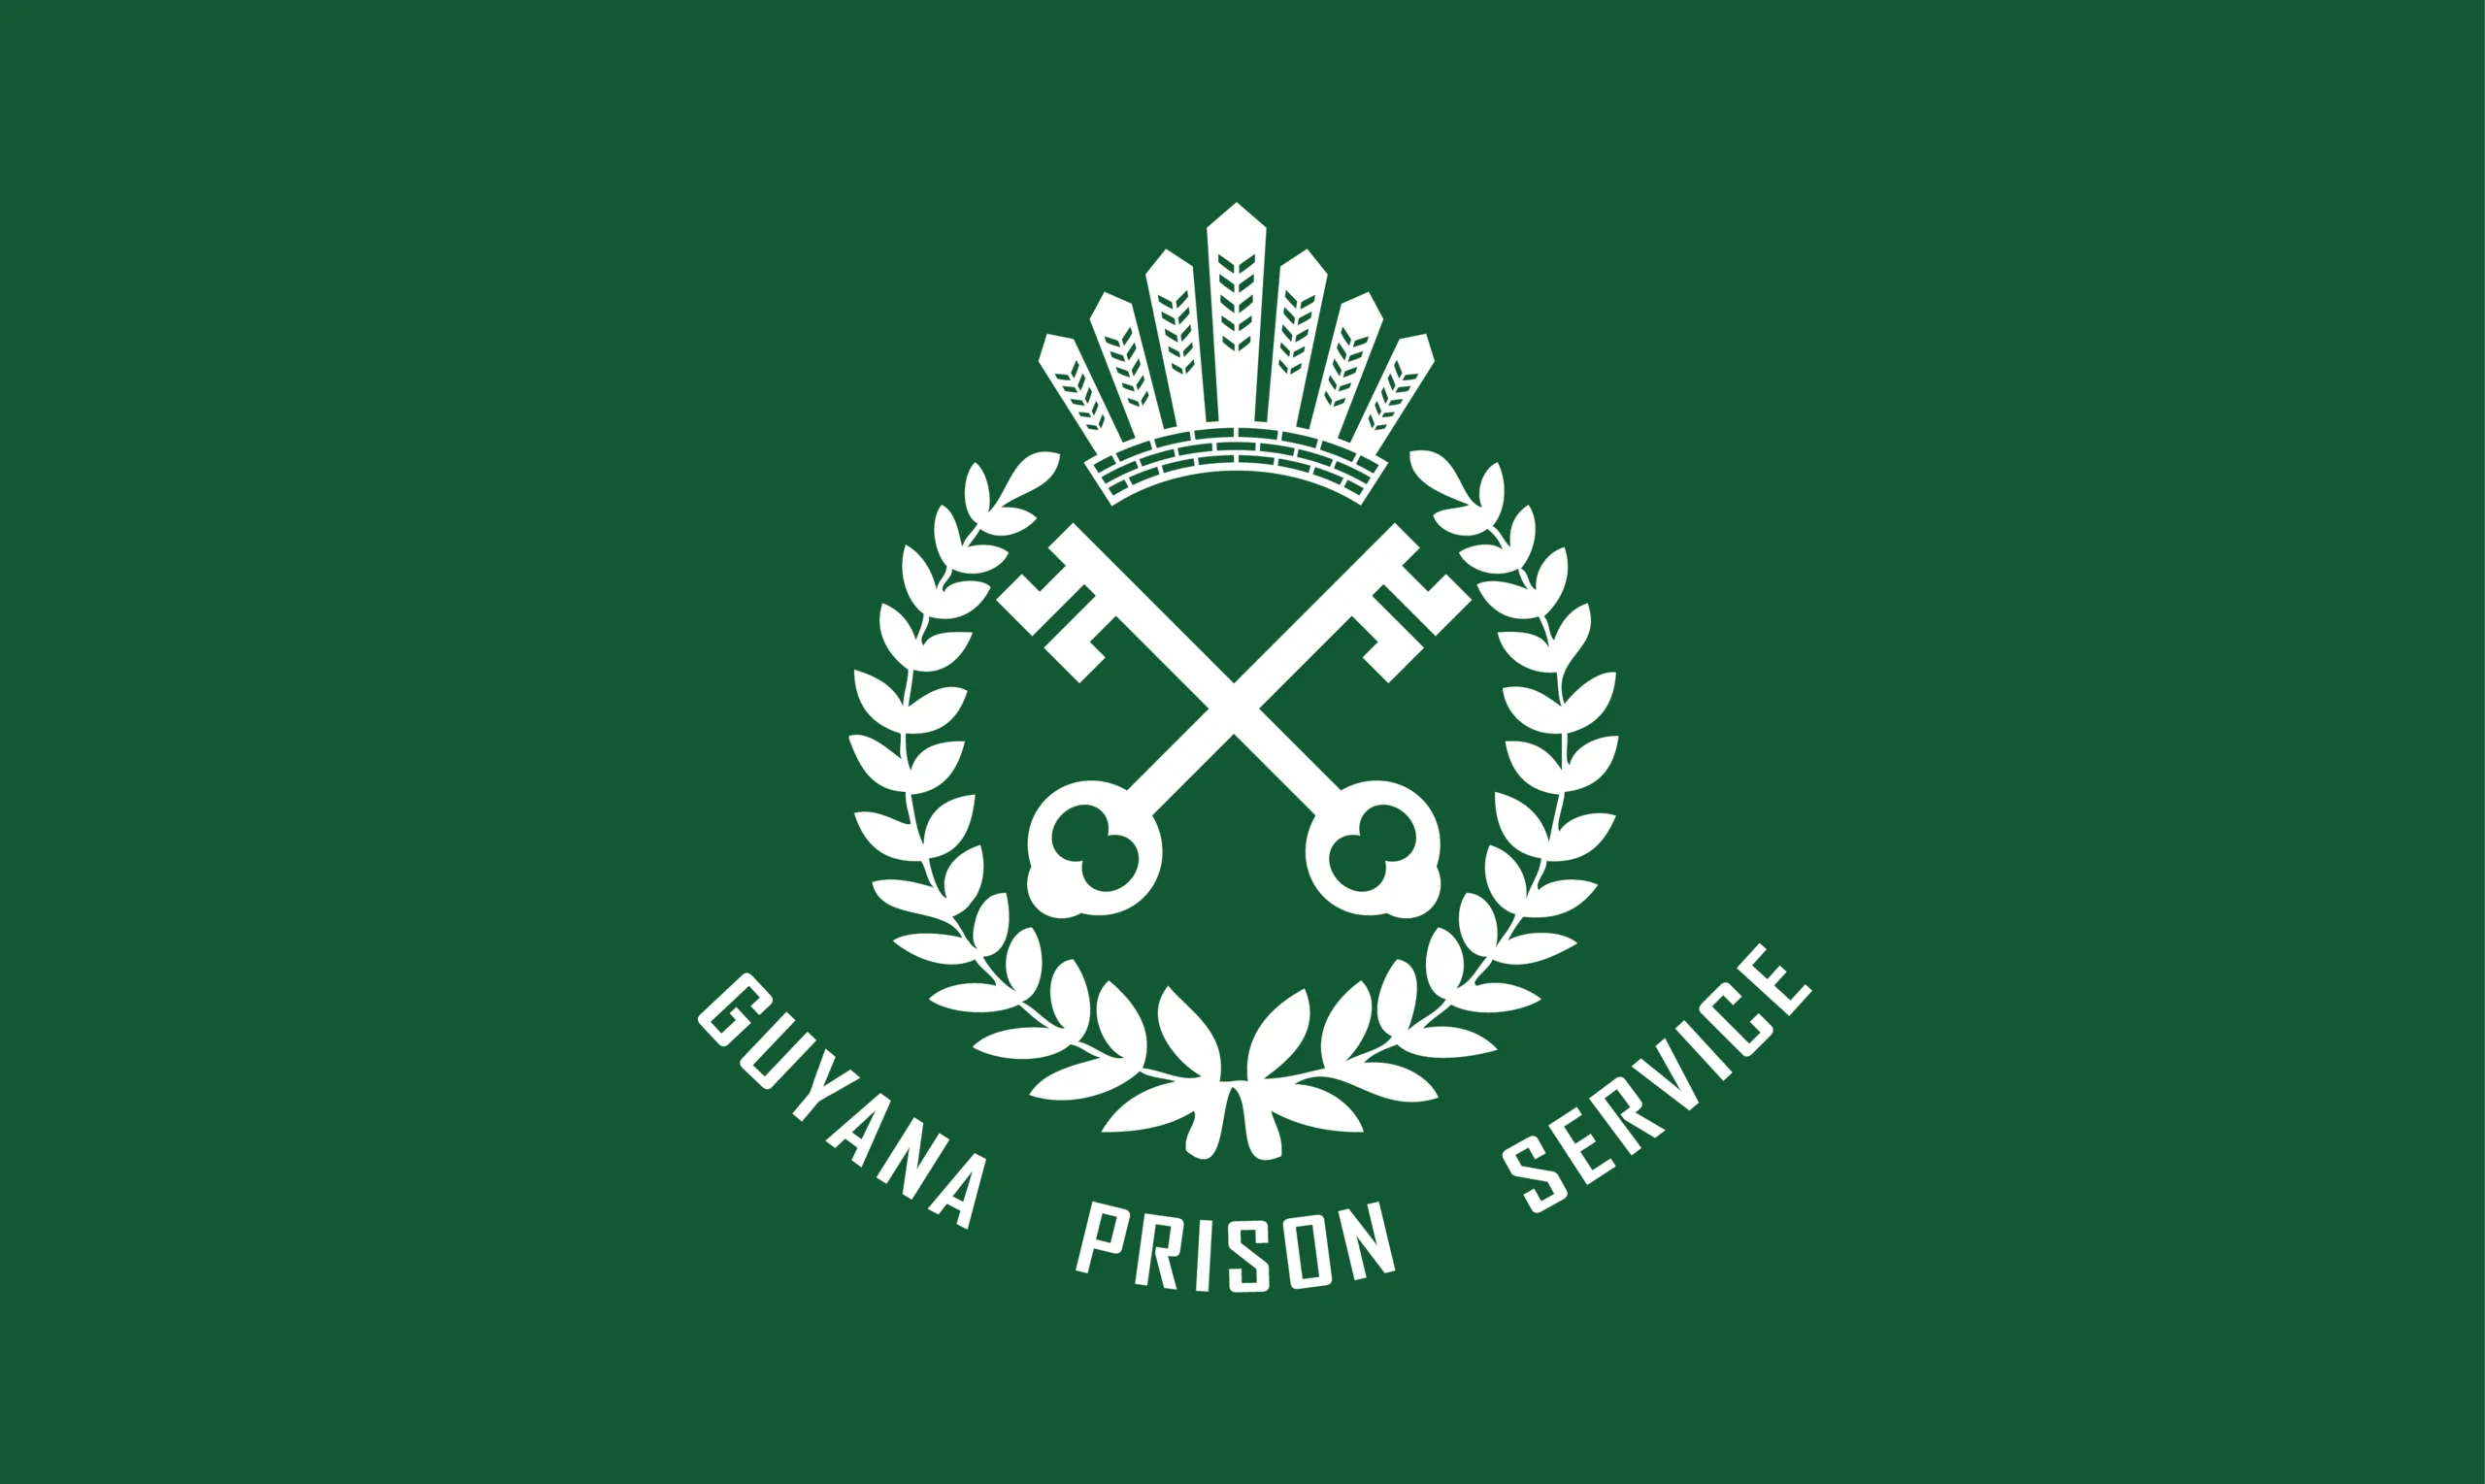 The Flag of the Guyana Prison Service